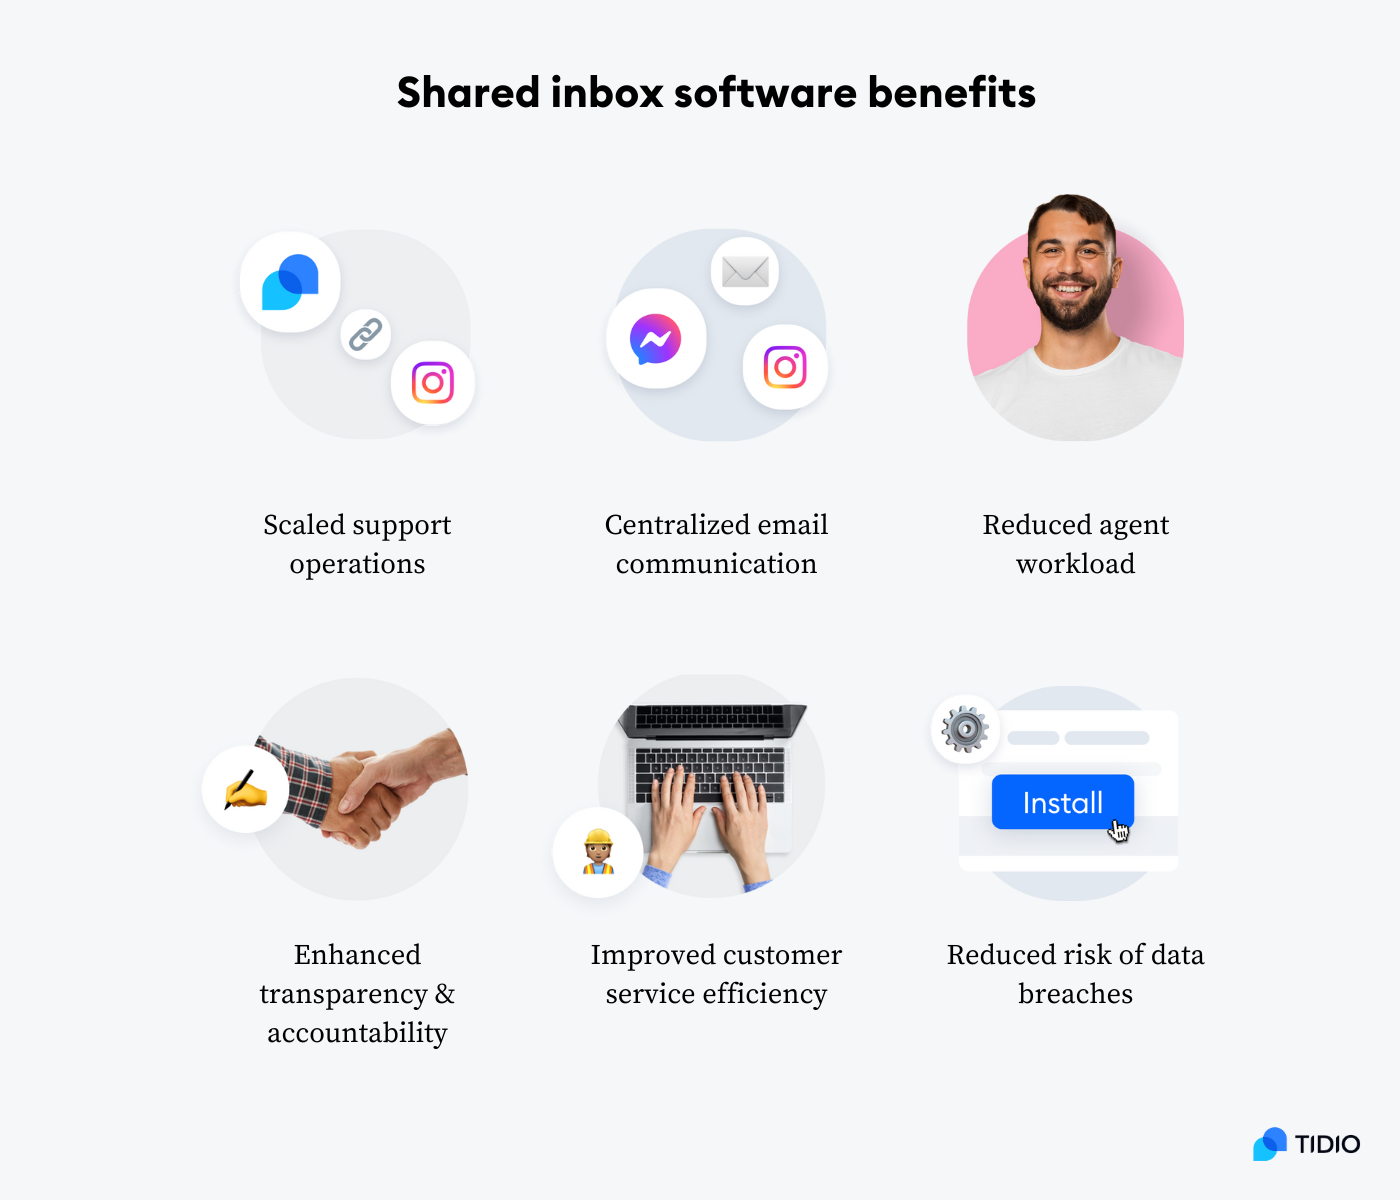 shared inbox software benefits on image